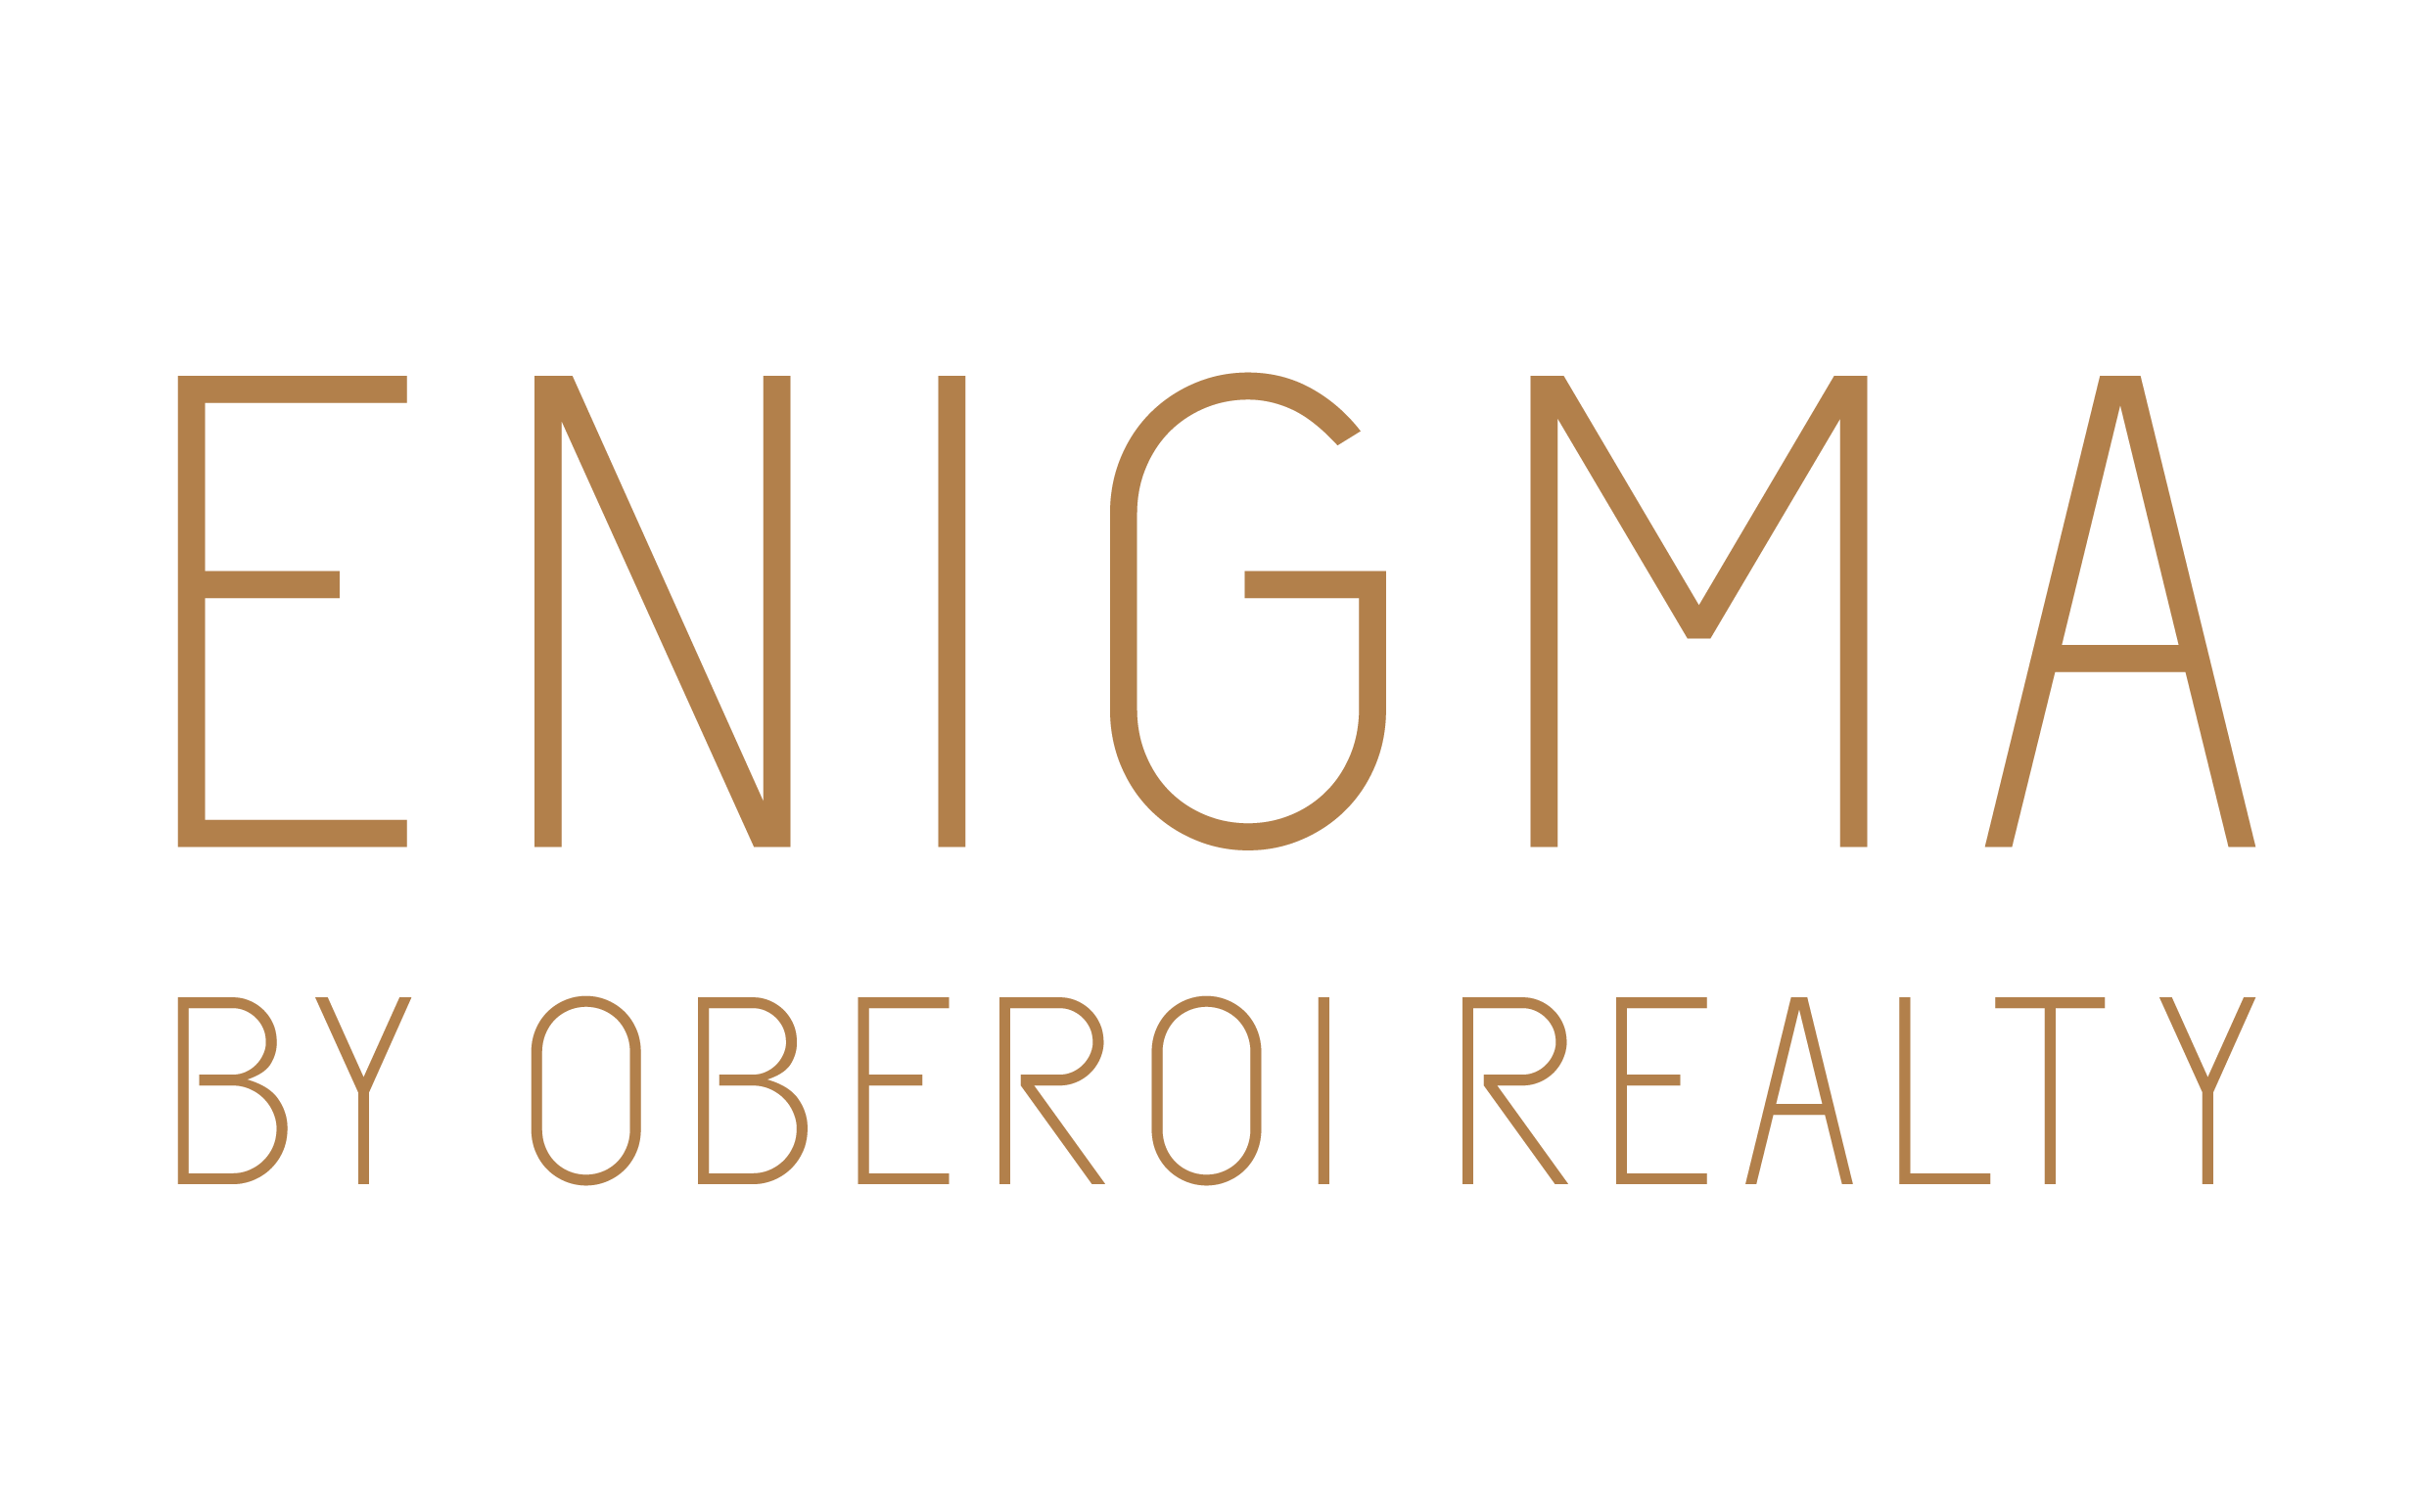 enigma-by-oberoi-realty-floor-plan-mulund-west-central-mumbai-suburbs